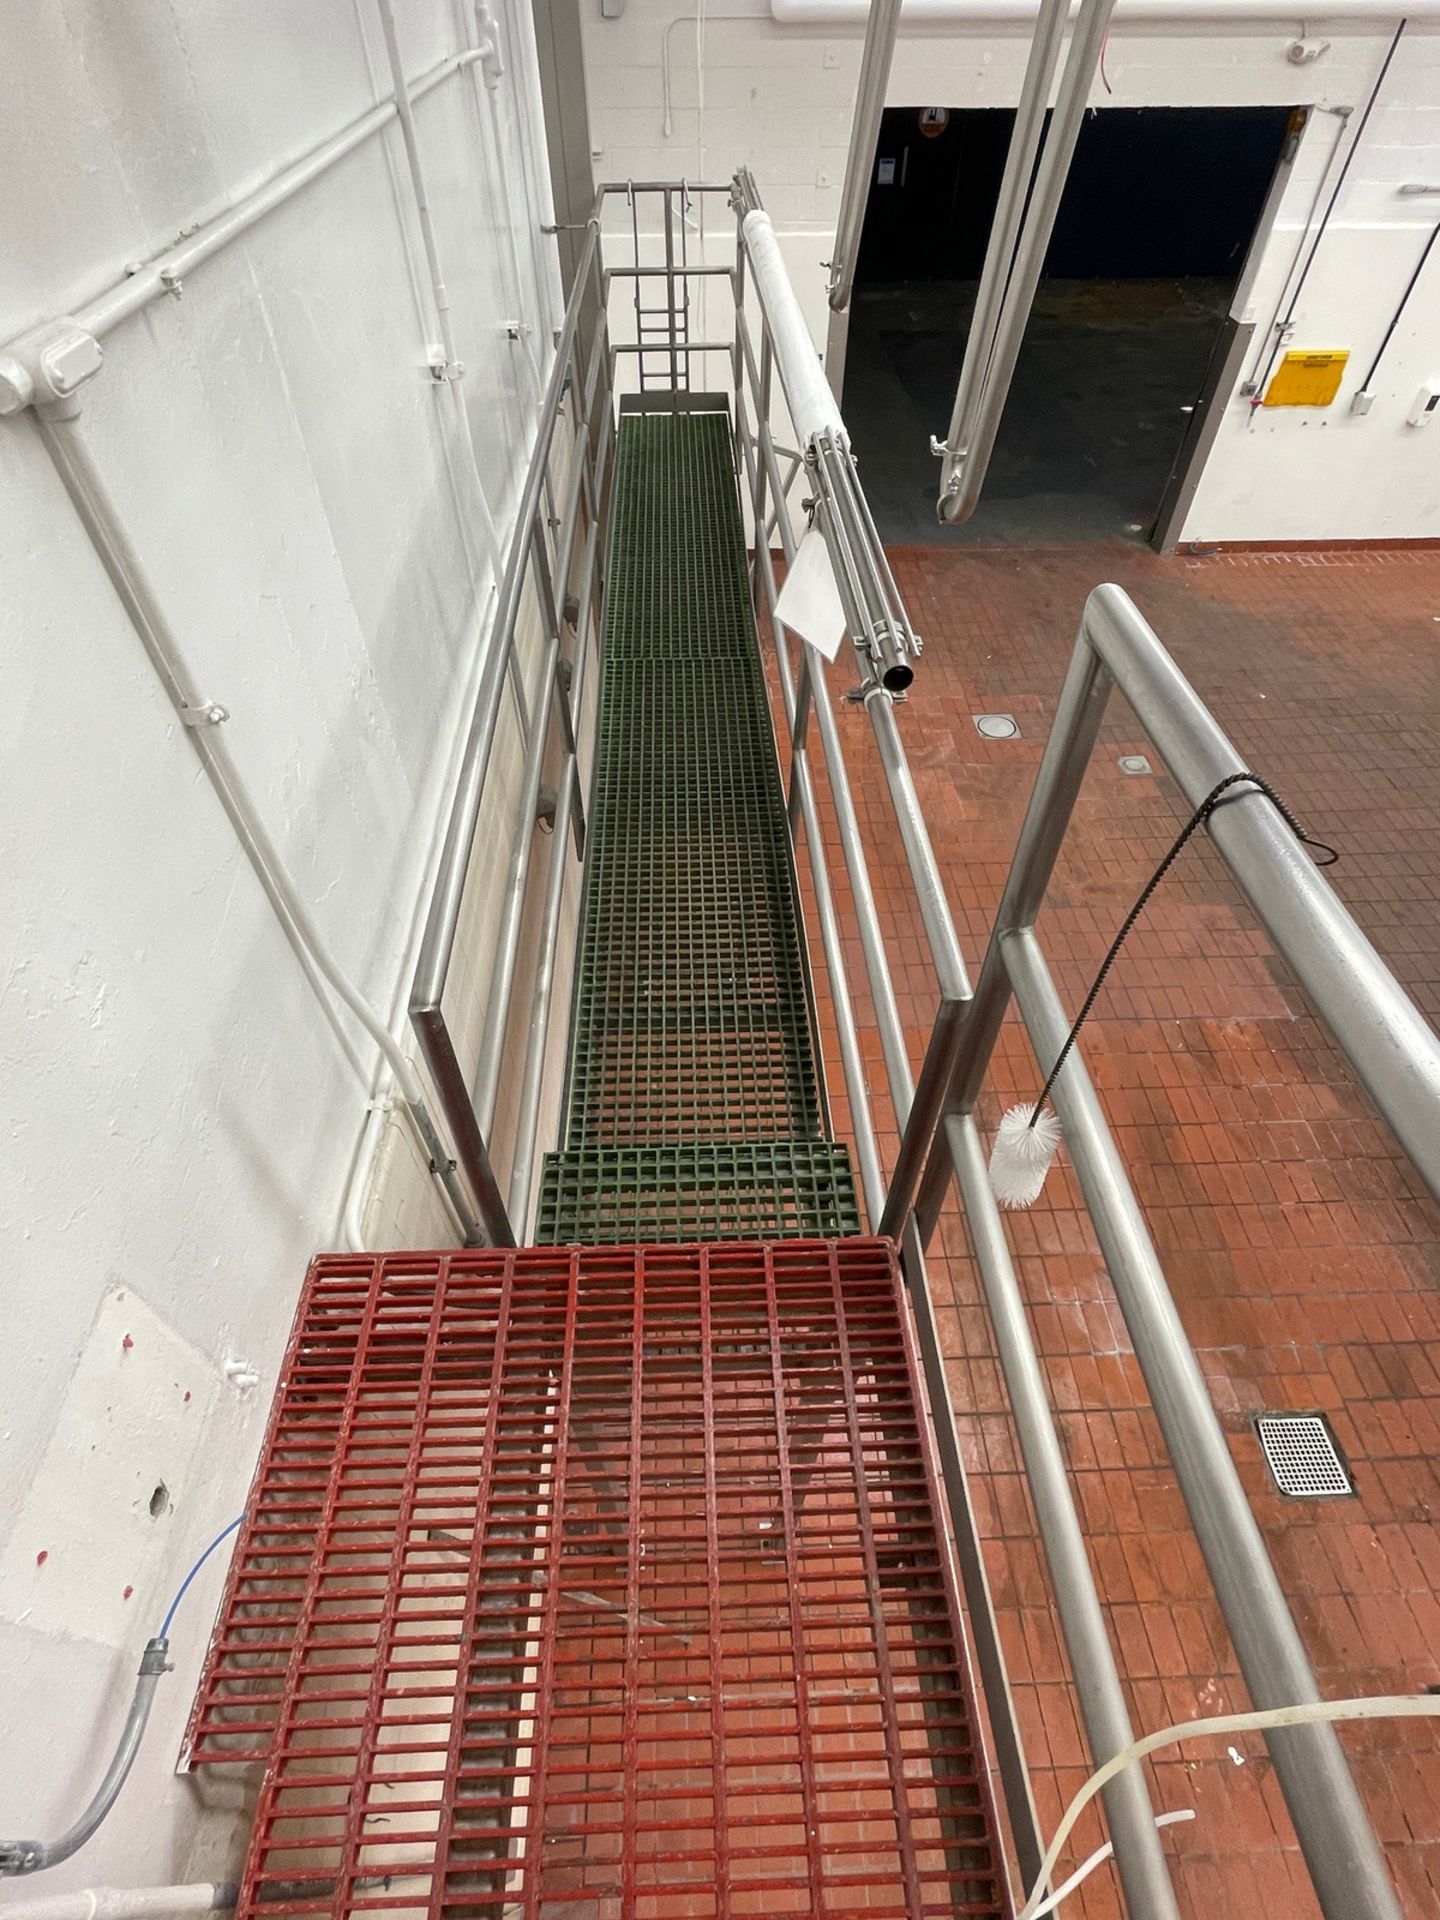 Stainless Steel Operator Platform for Lots 1 and 2 with Extended Walkway | Rig Fee $1500 - Image 7 of 7